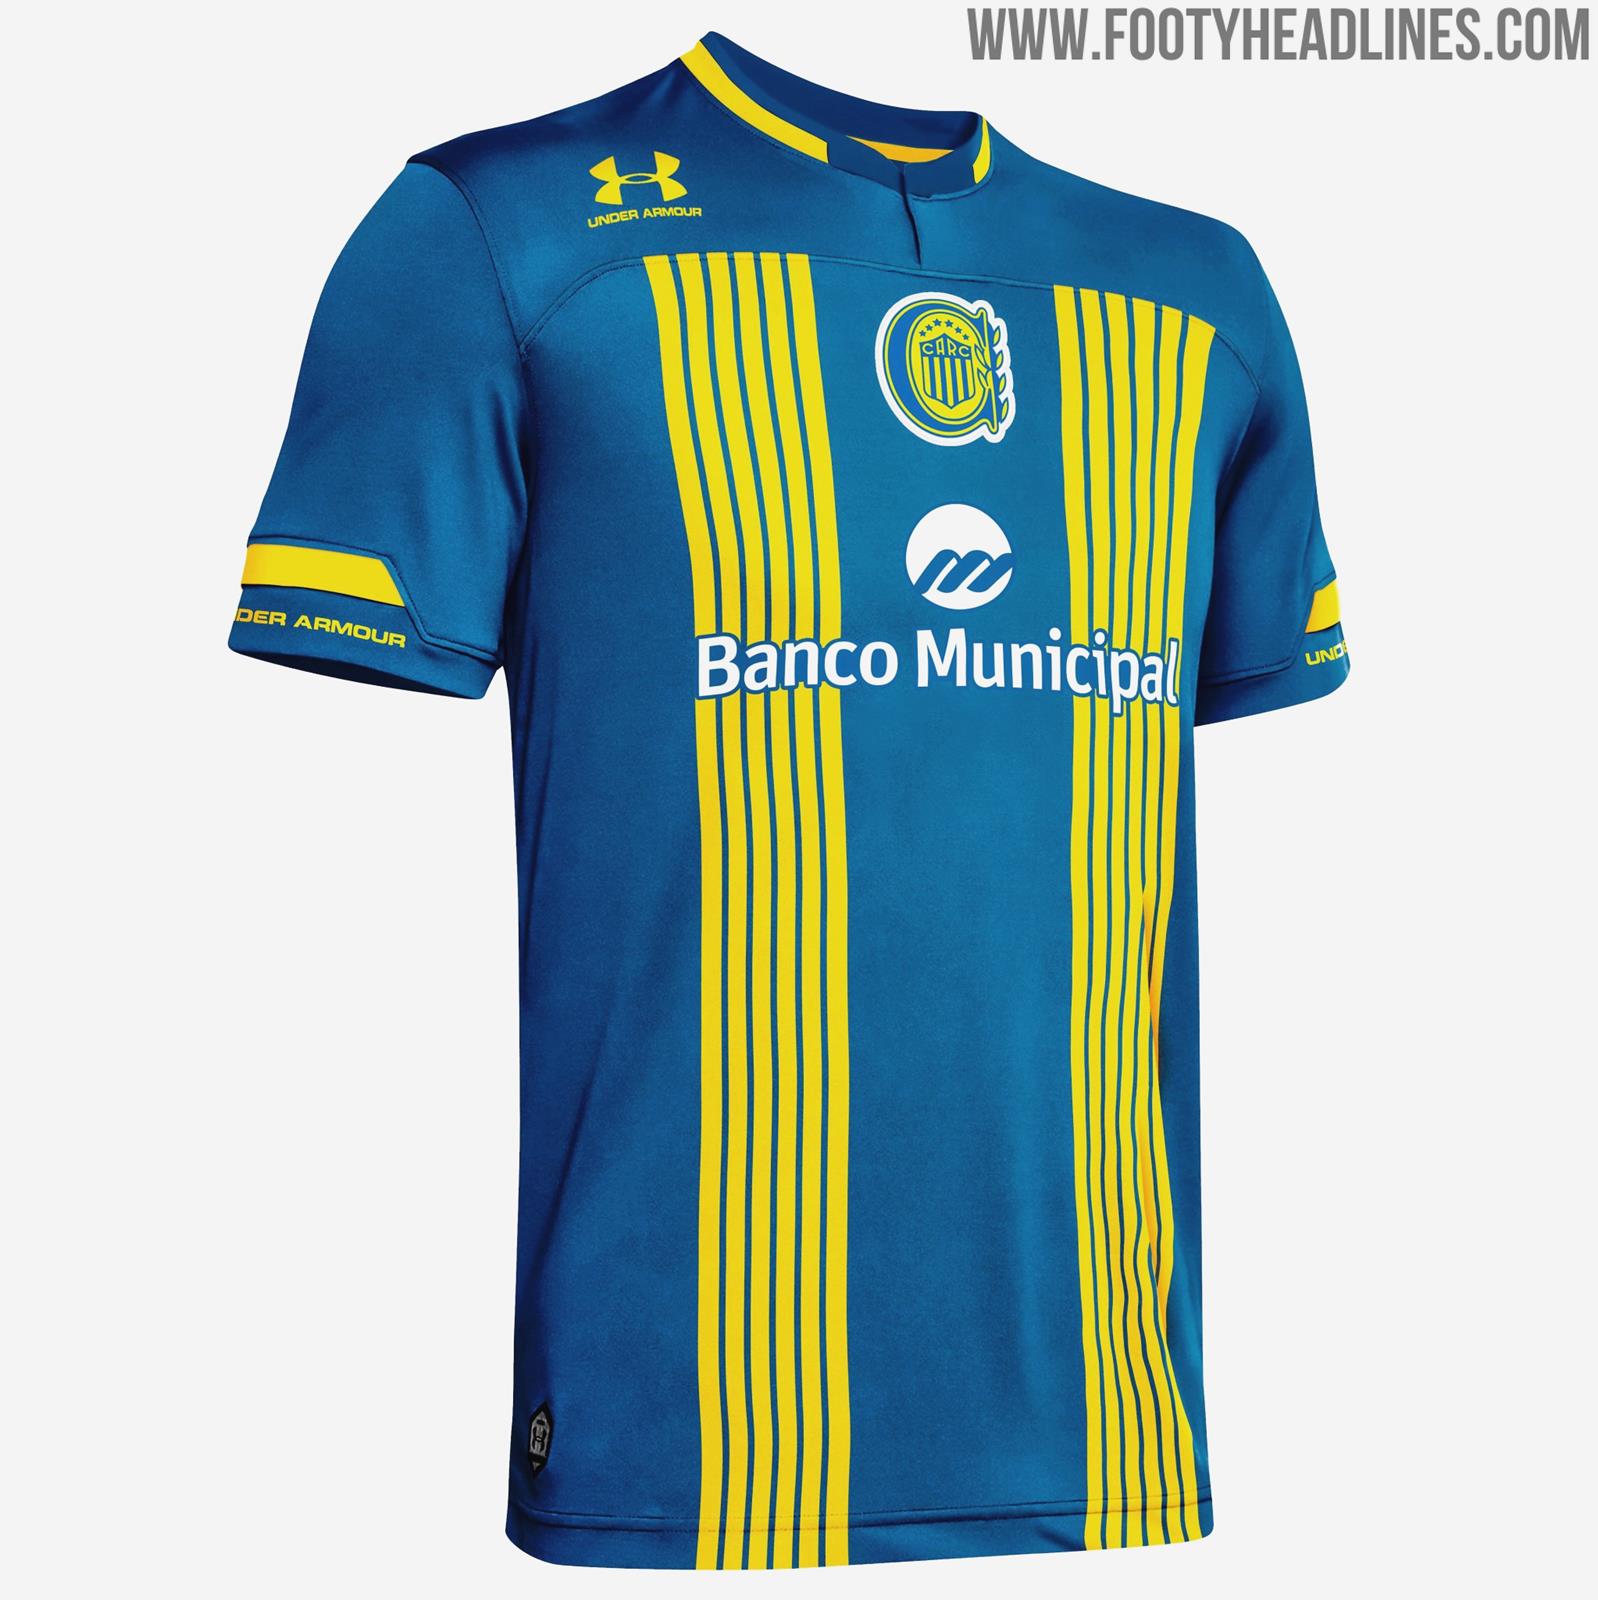 Under Armour Rosario Central 2020 Home & Away Kits Released - Same Template as Southampton Footy Headlines